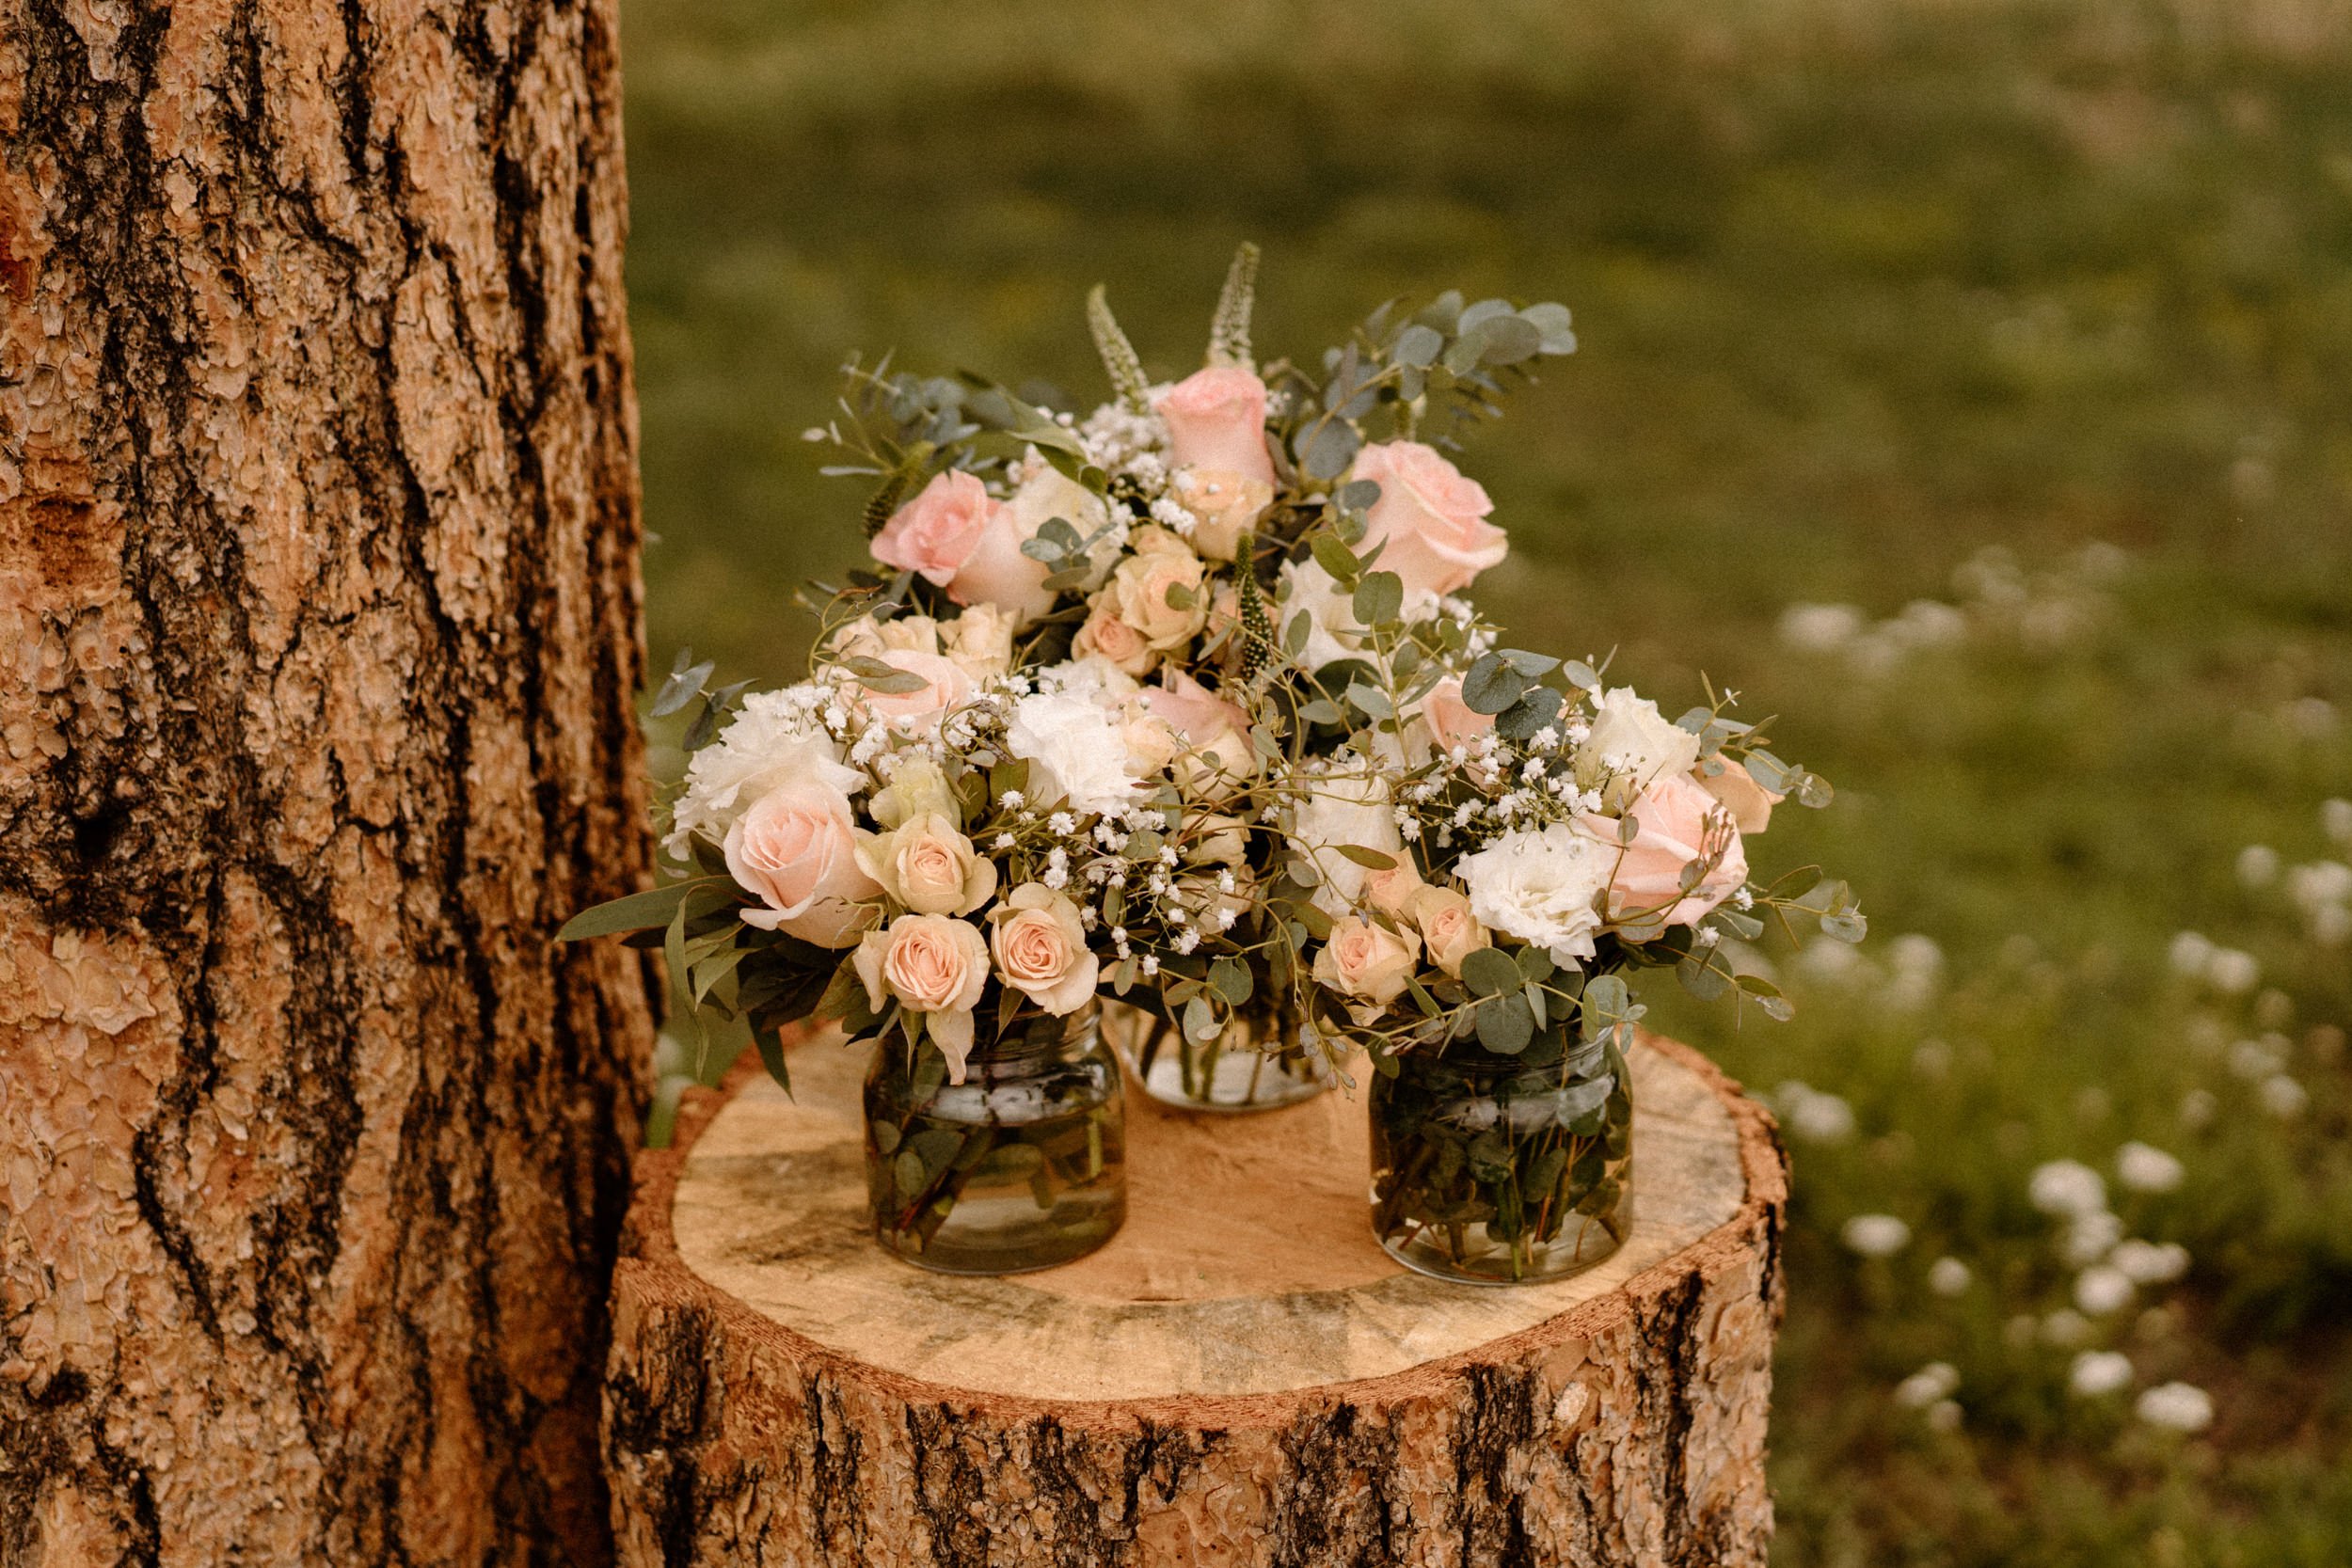 Pink and white flower bouquets sit atop the altar